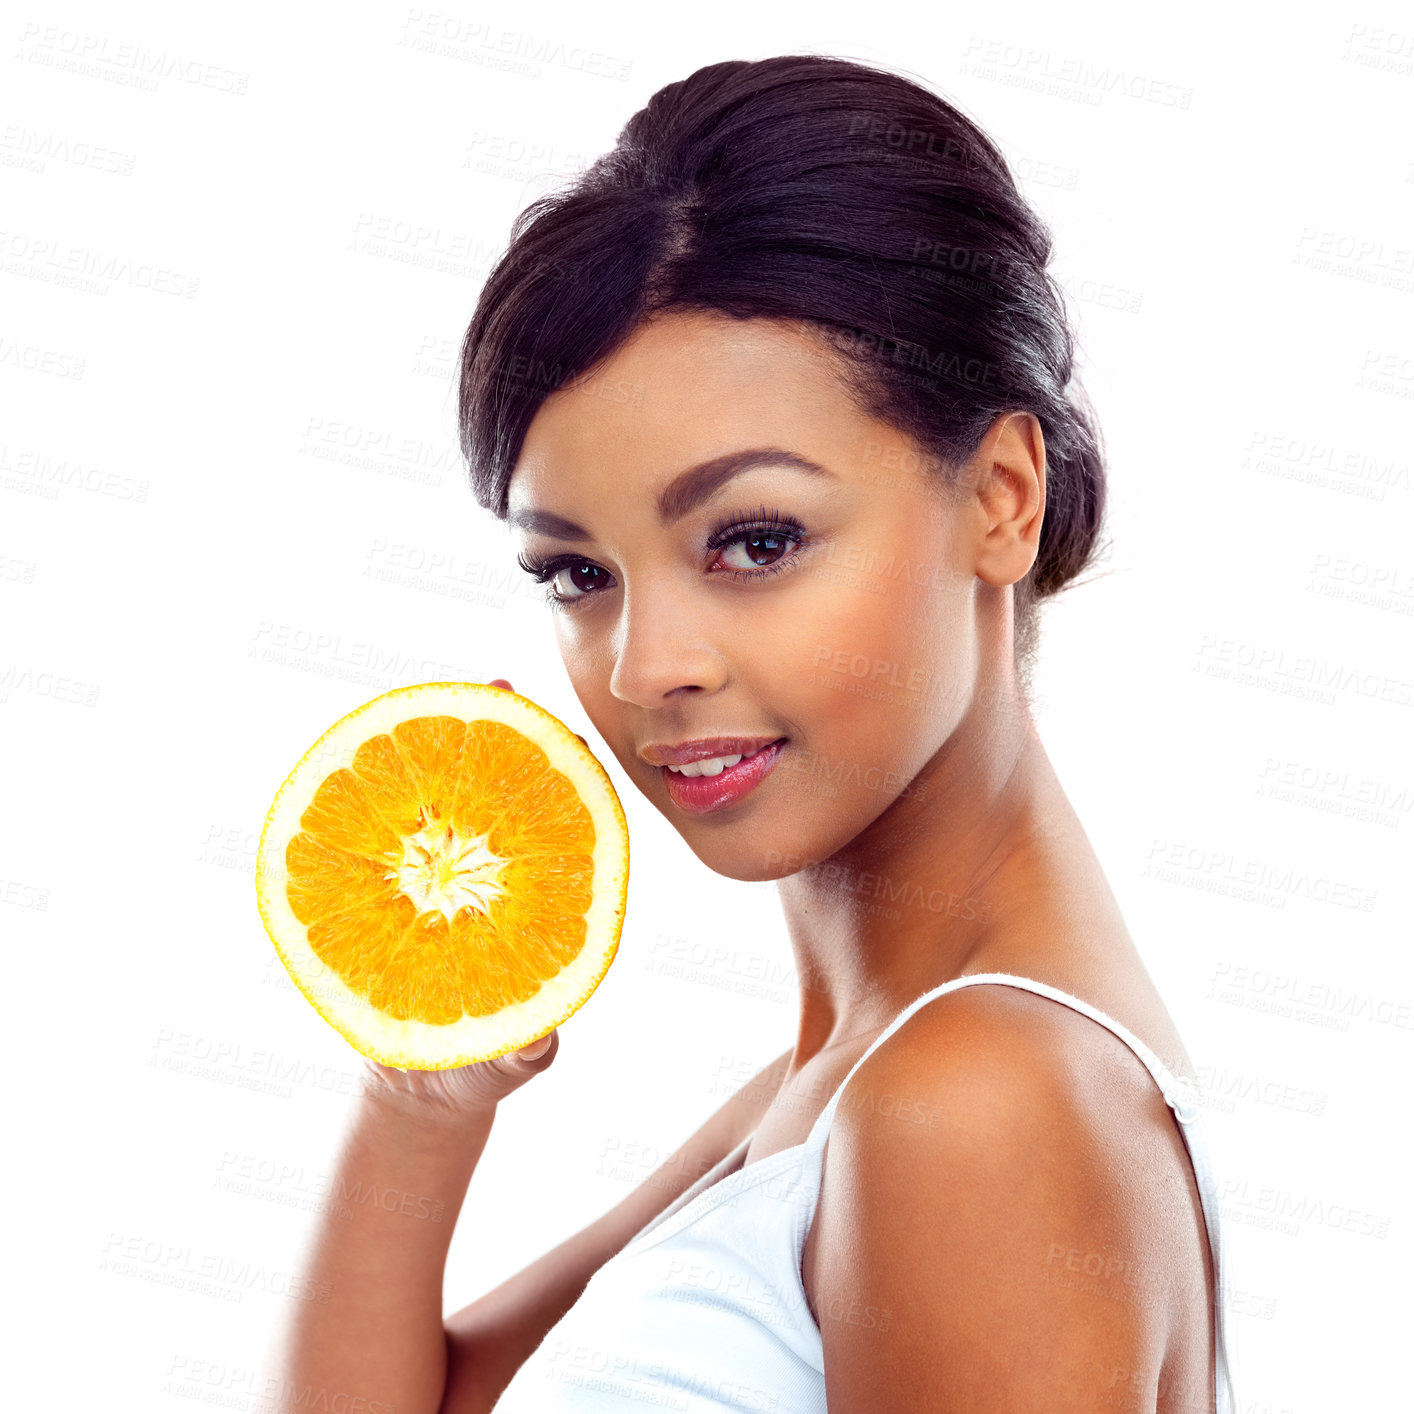 Buy stock photo Portrait, diet and woman with orange, nutrition and sustainable eating to lose weight in studio. Citrus fruit, face and girl with fresh food for detox, vitamin c and gut health on white background.